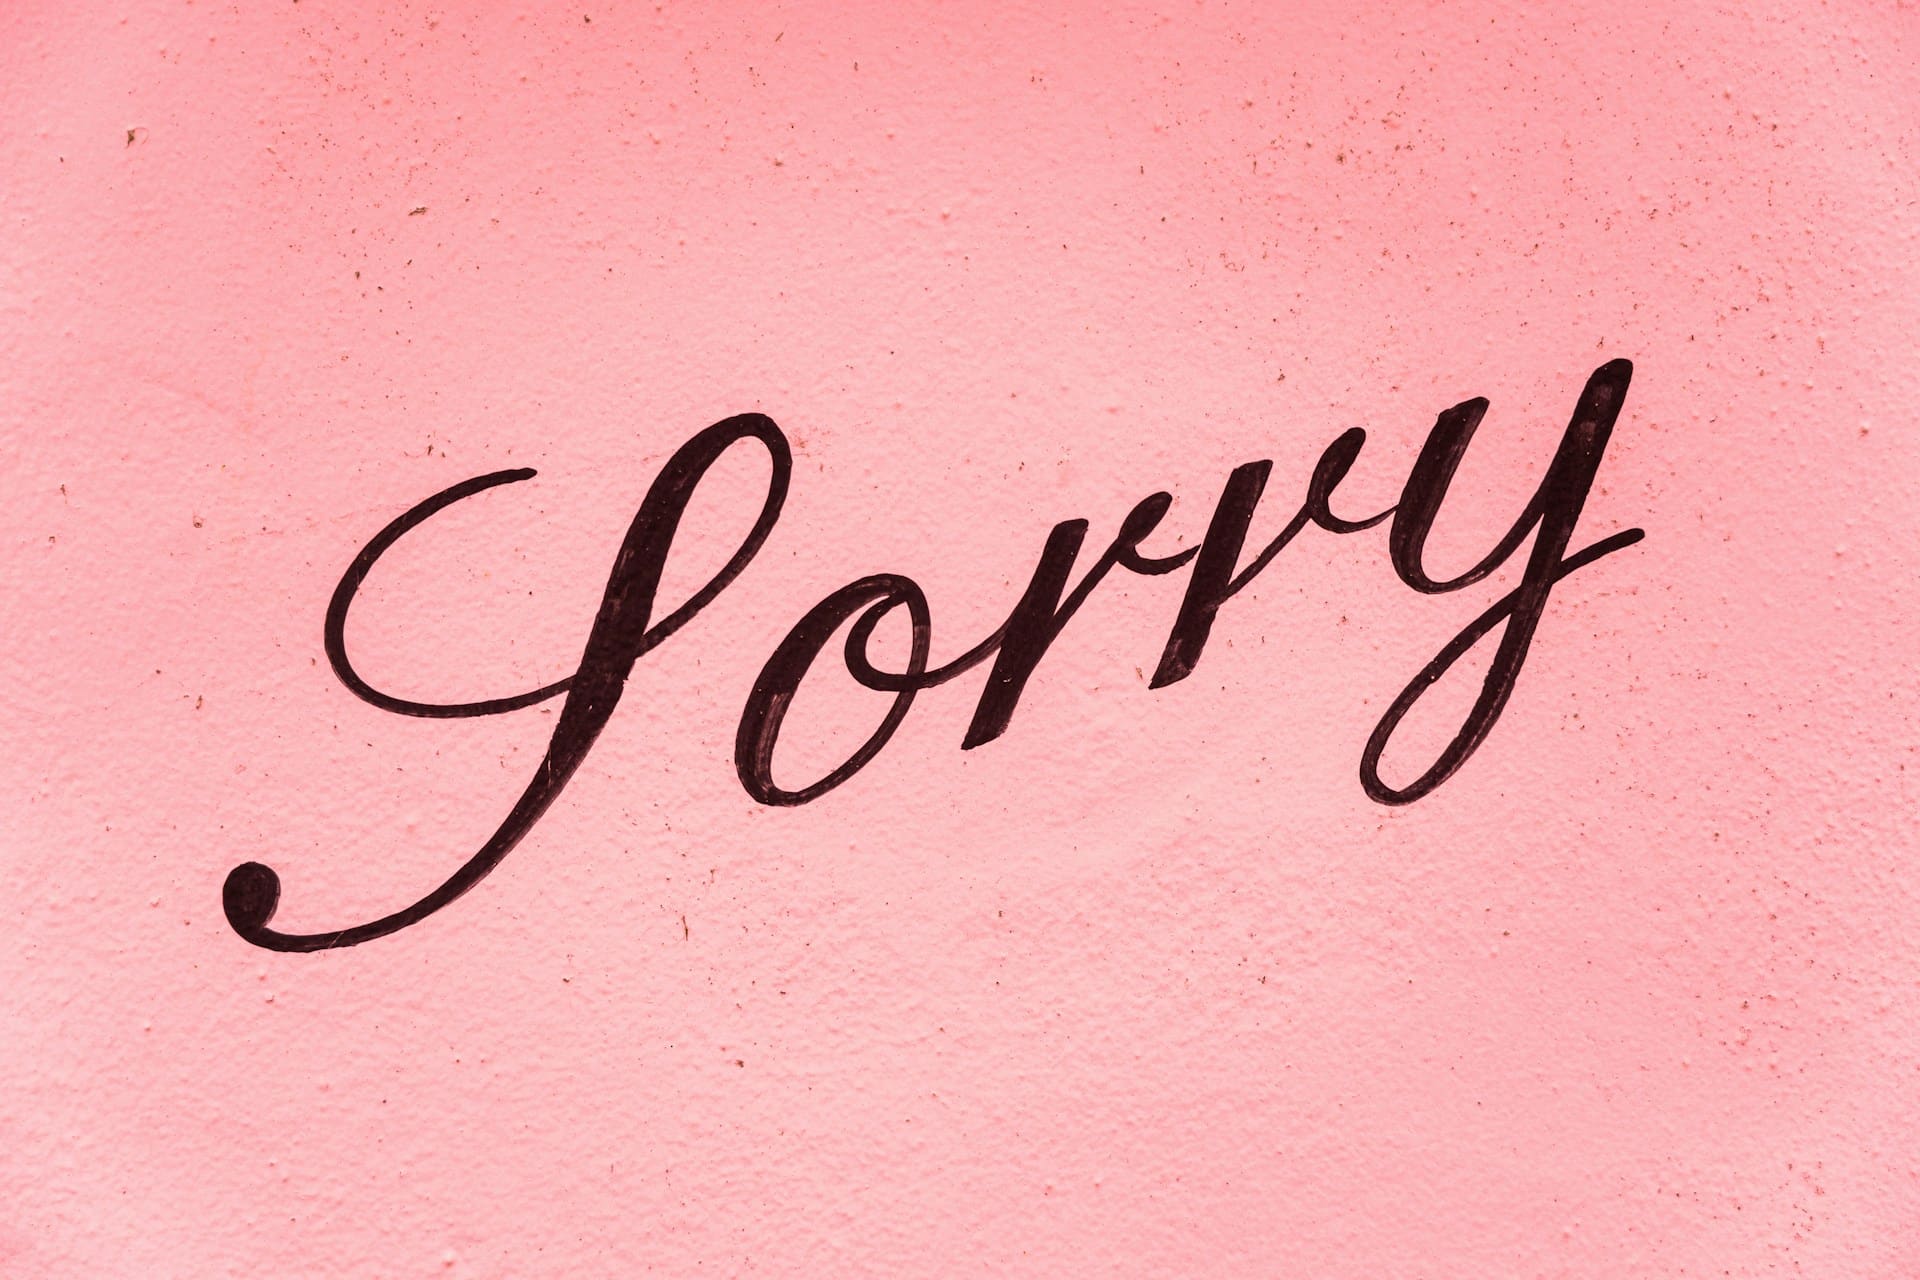 the-word-sorry-in-cursive-writing-against-pink-background